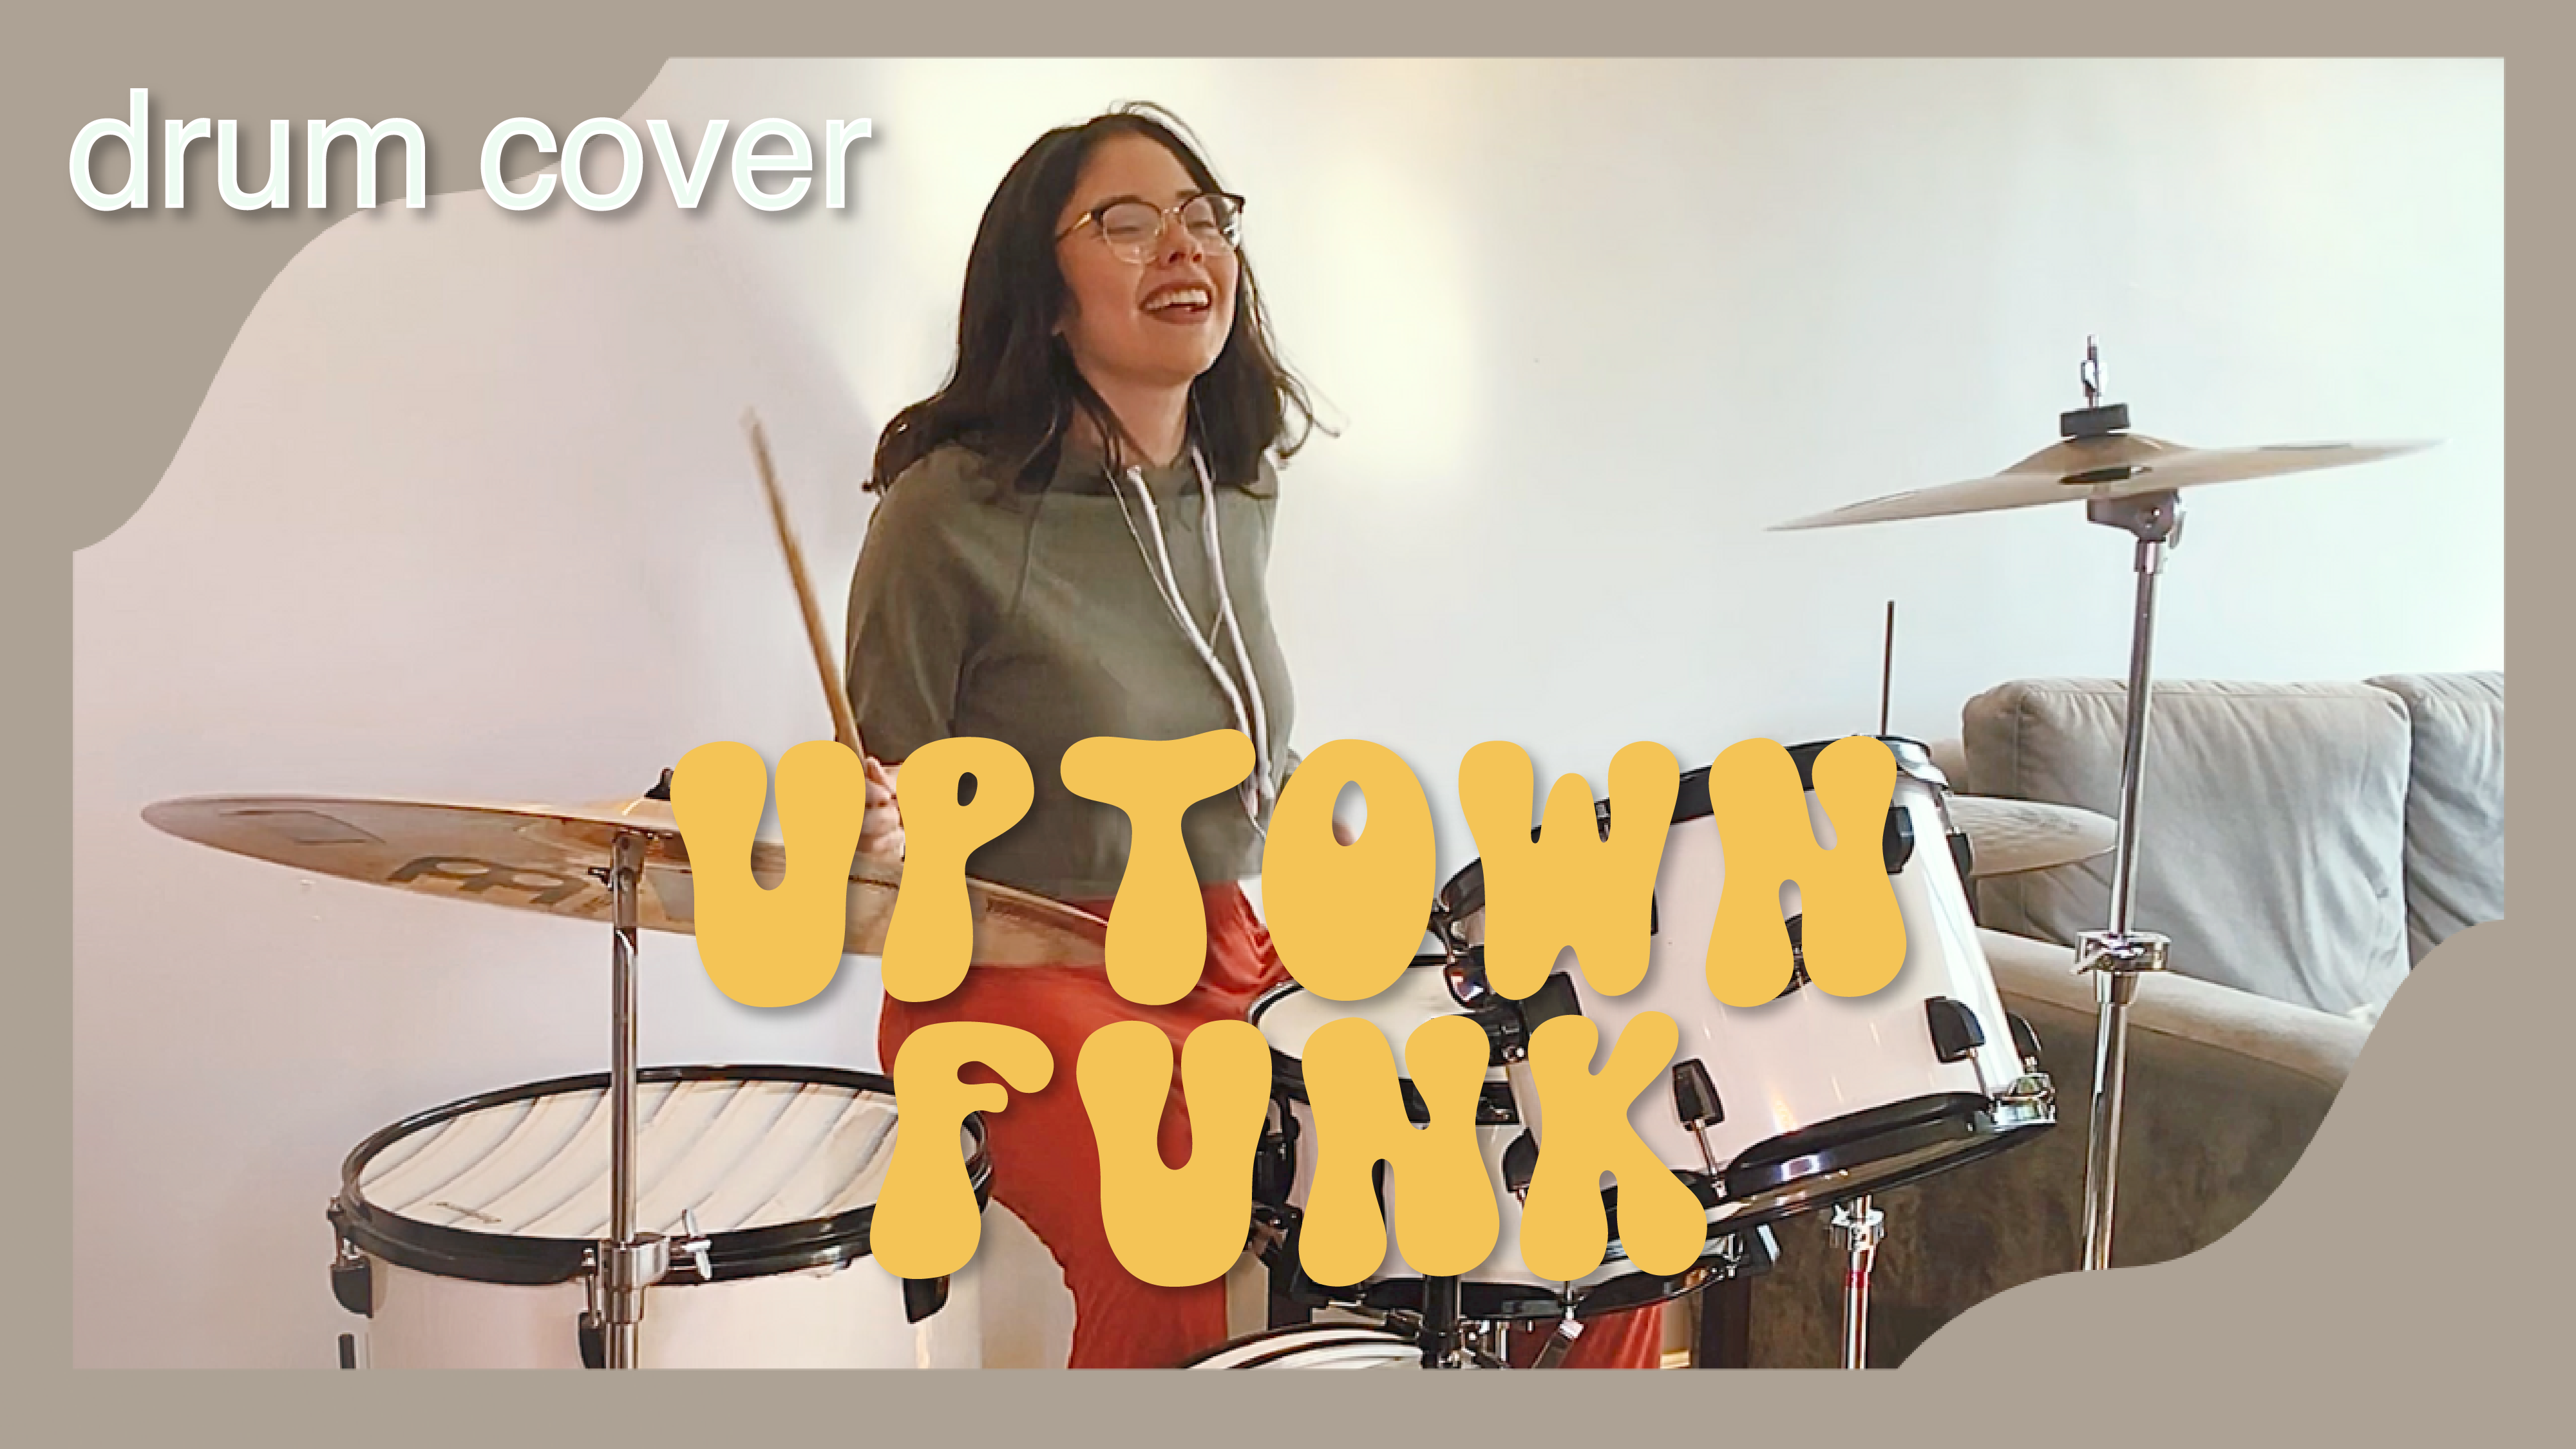 3 uptownfunk-drumcover-byoripenalver-01-03.png